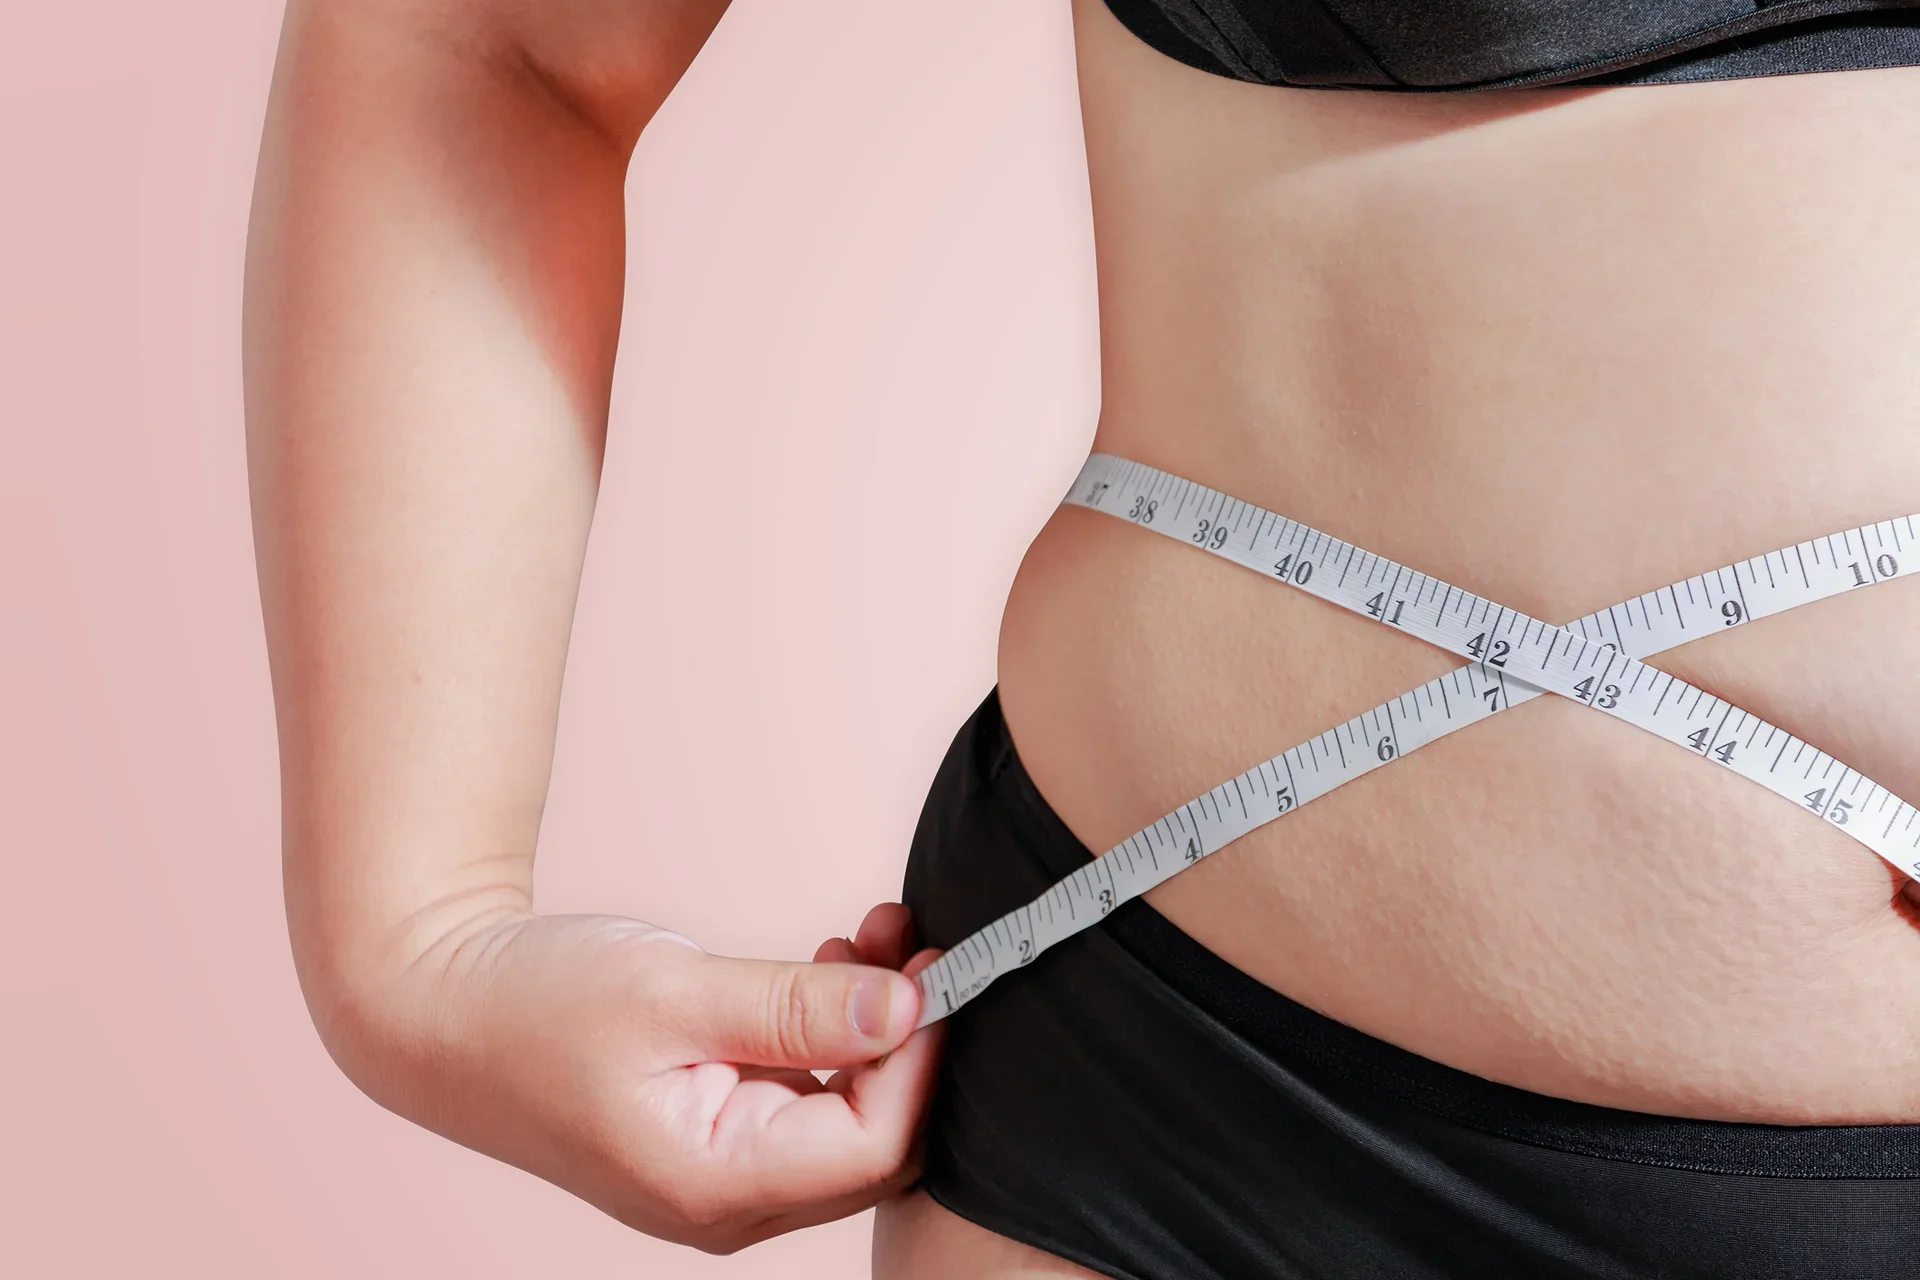 A person measuring their waist with a tape measure, focusing on midsection sculpting. They are partially dressed in black undergarments against a plain, light pink background.